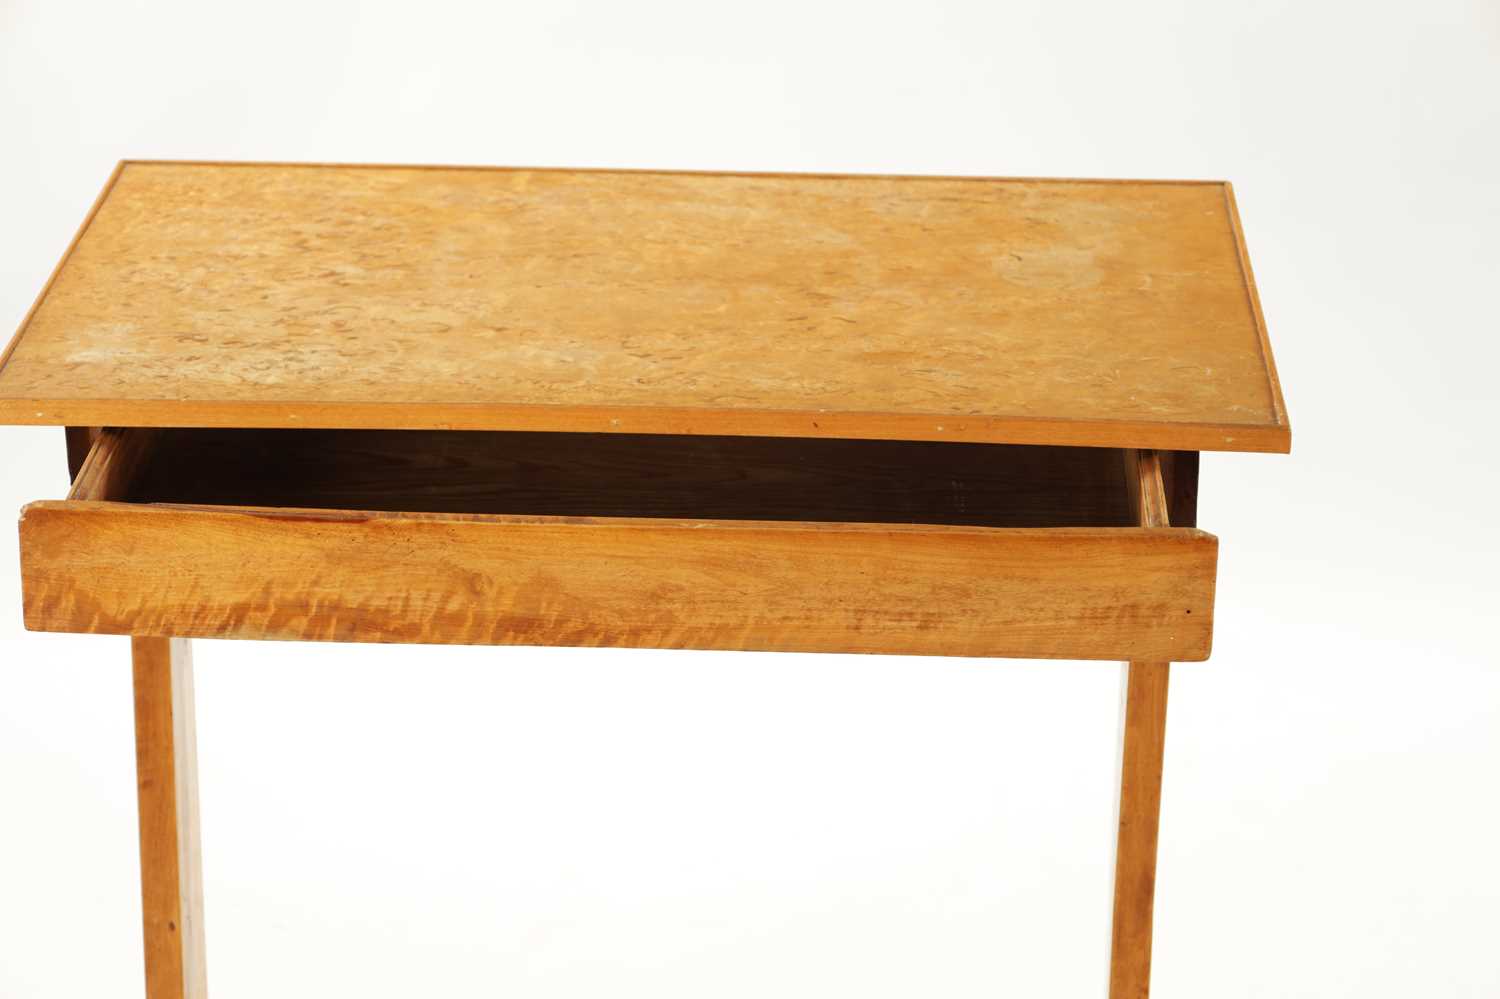 A 19TH CENTURY BURR MAPLE SIDE TABLE - Image 5 of 5